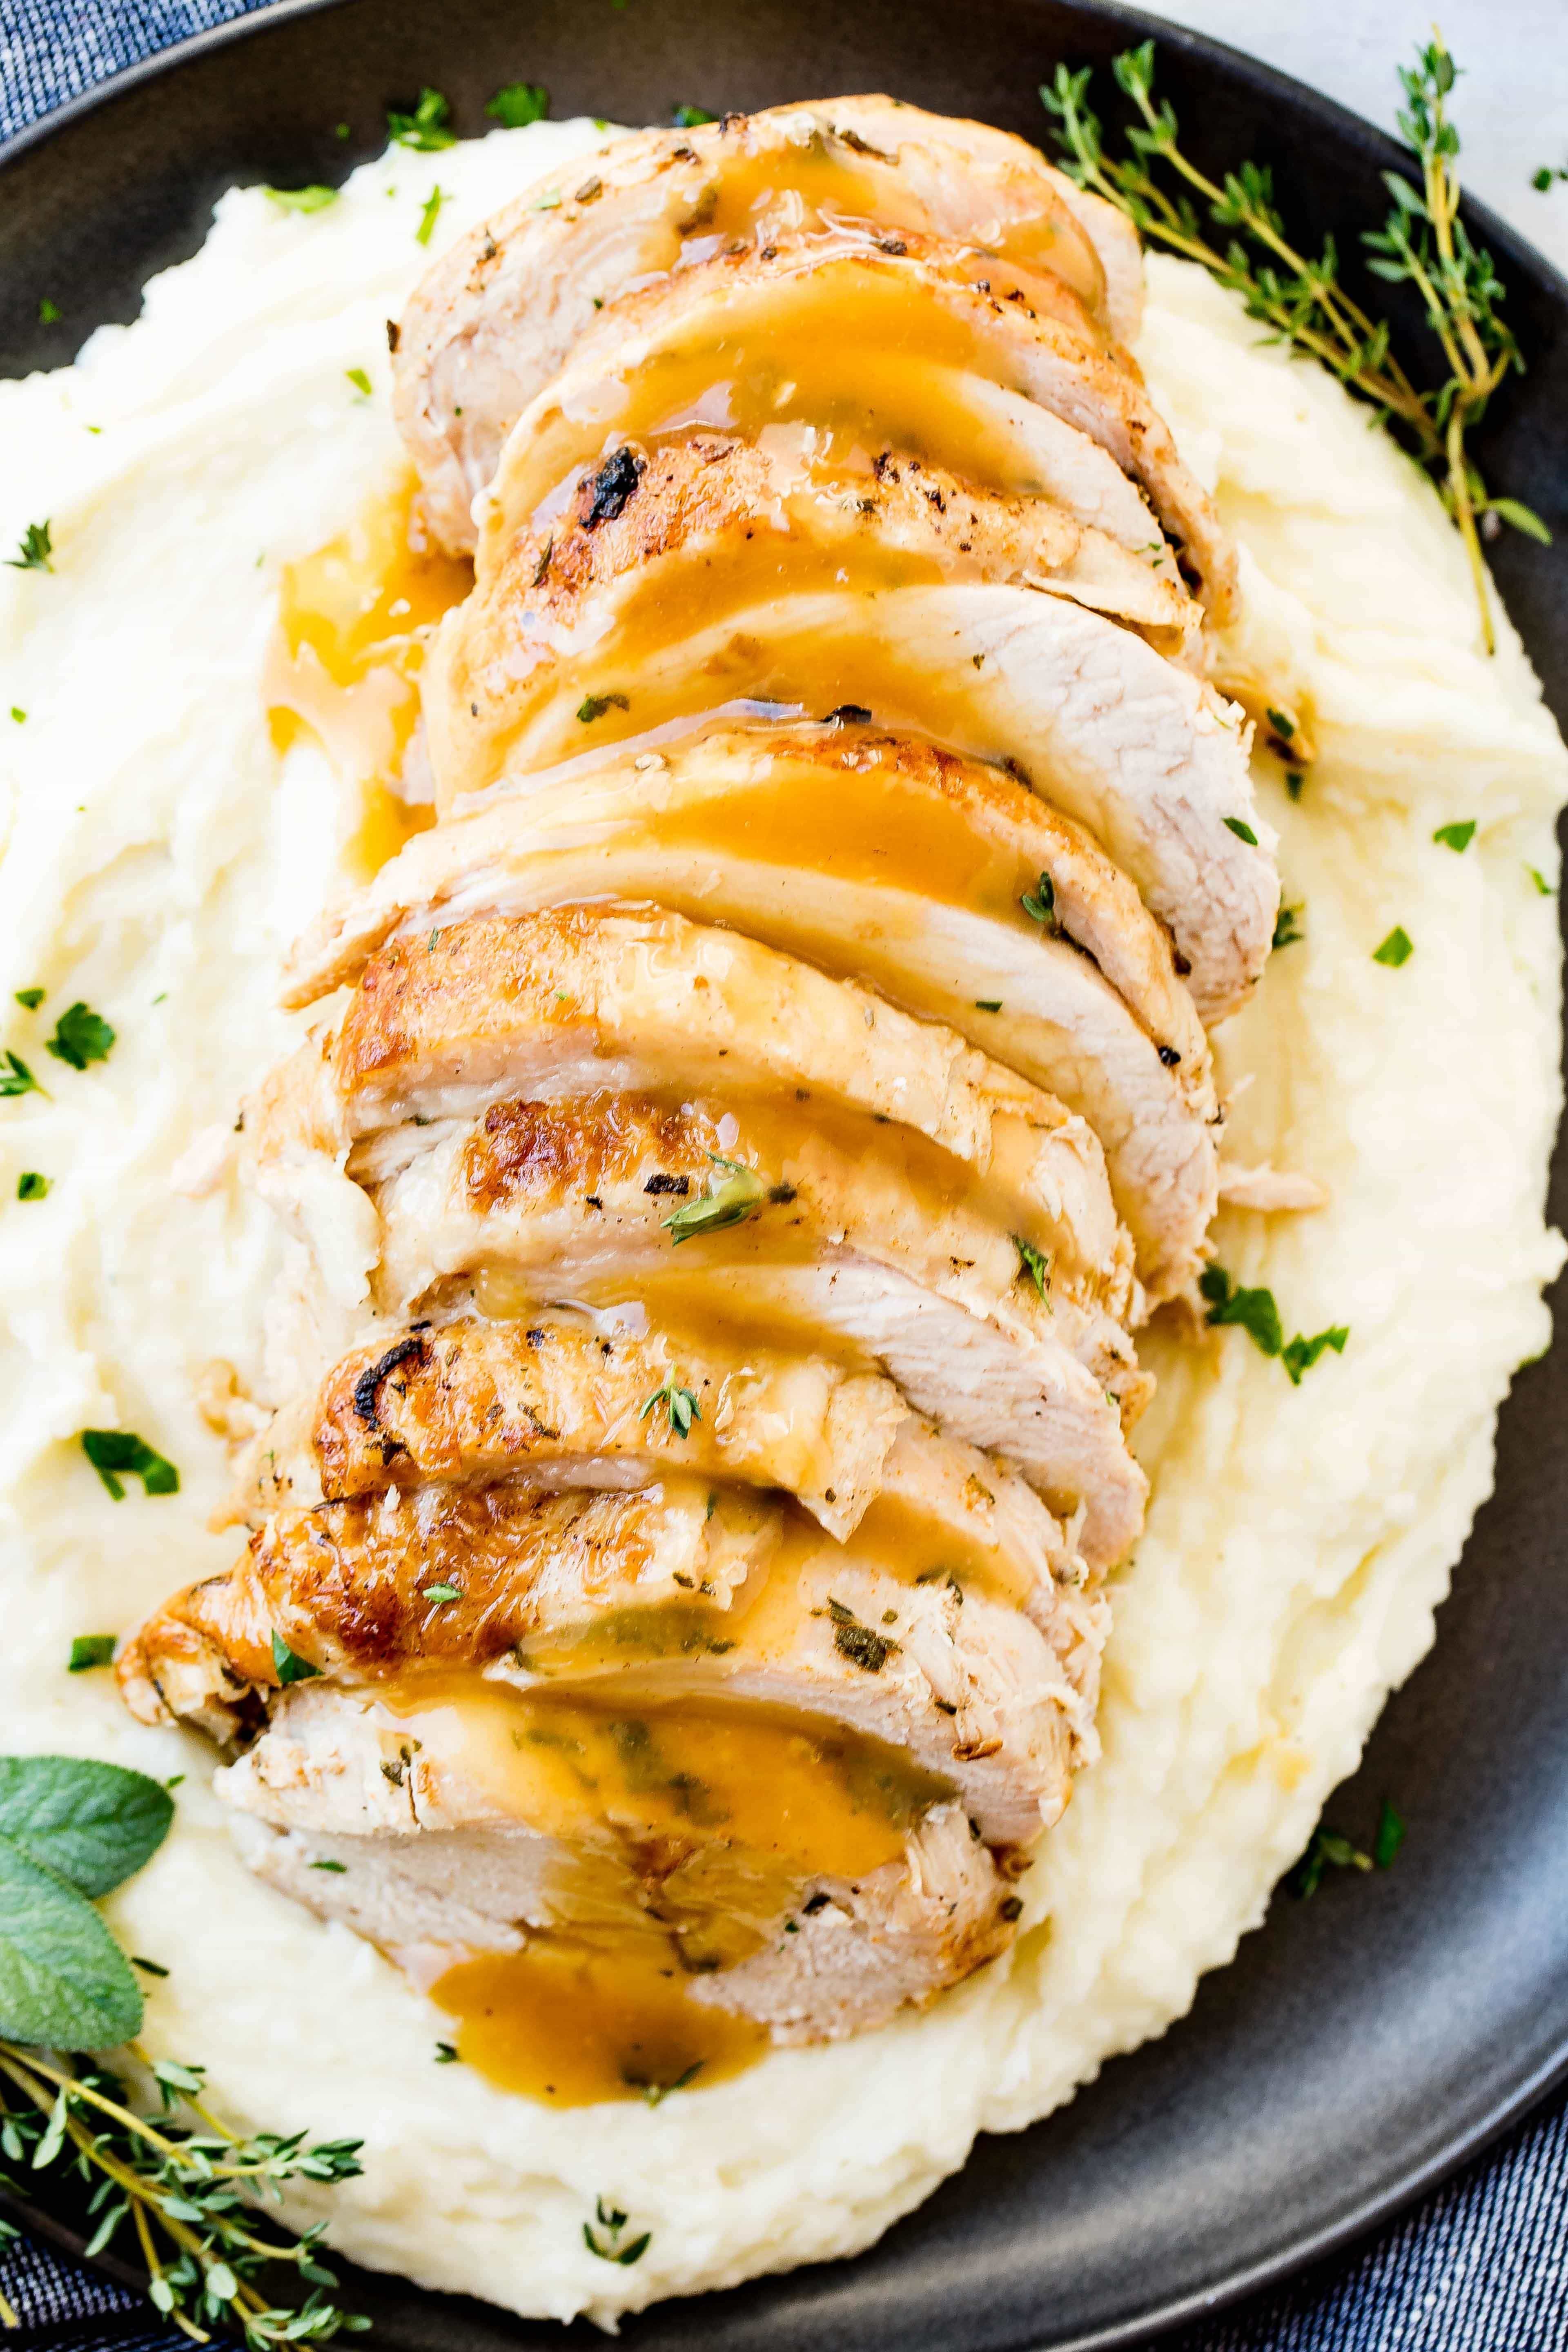 Instant Pot Turkey Breast Recipe (From Fresh or Frozen) - Oh Sweet Basil - Instant Pot Turkey Breast Recipe (From Fresh or Frozen) - Oh Sweet Basil -   18 turkey breast cutlet recipes instant pot ideas